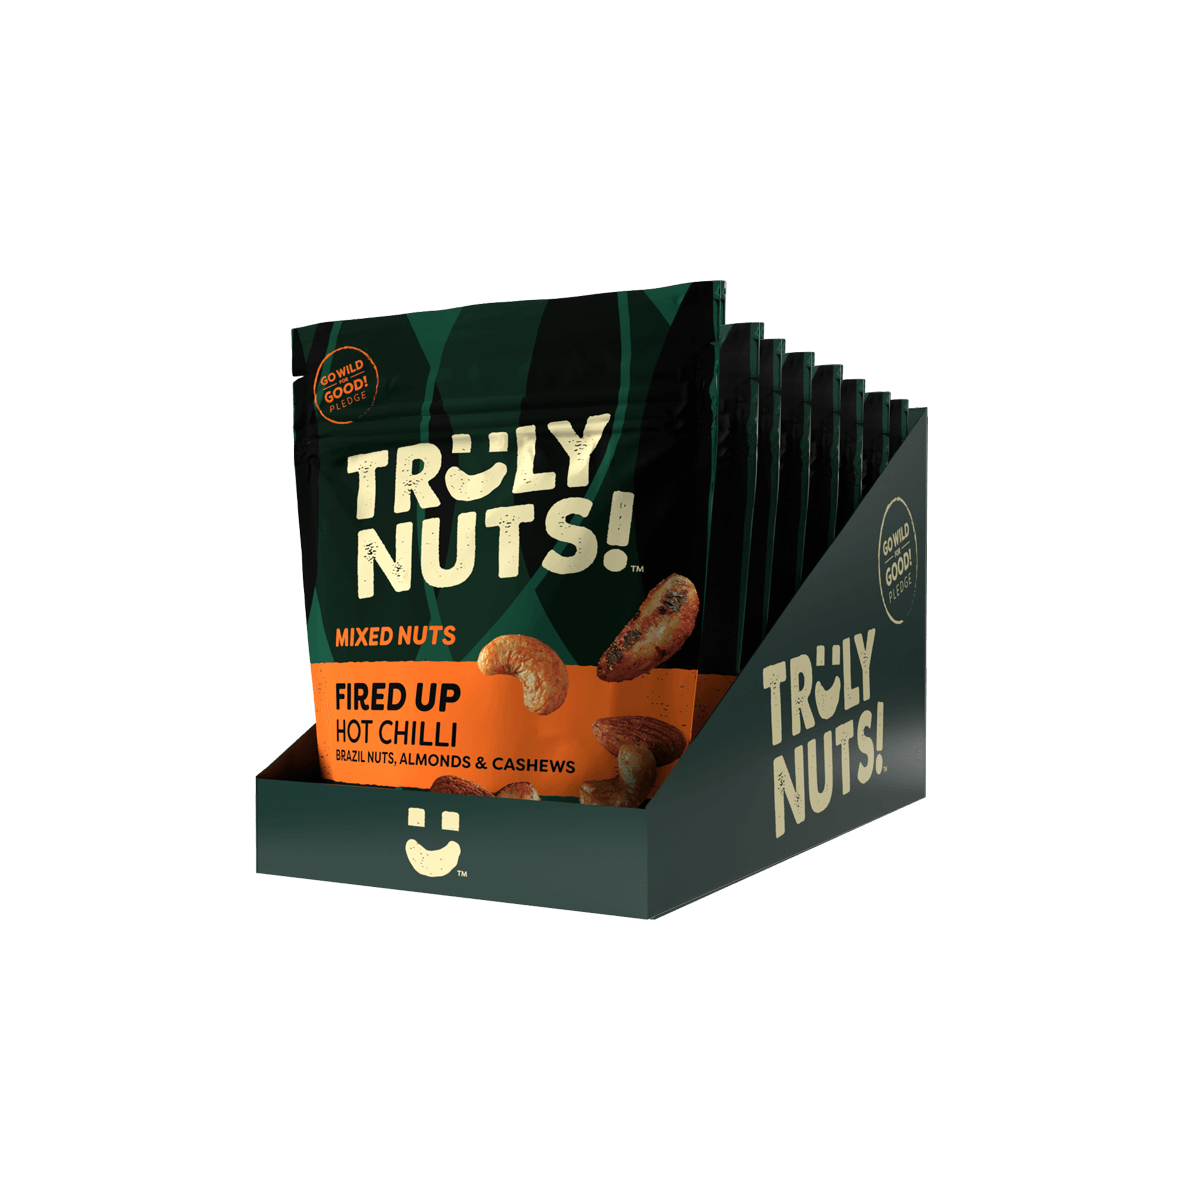 MIXED NUTS - Hot Chilli